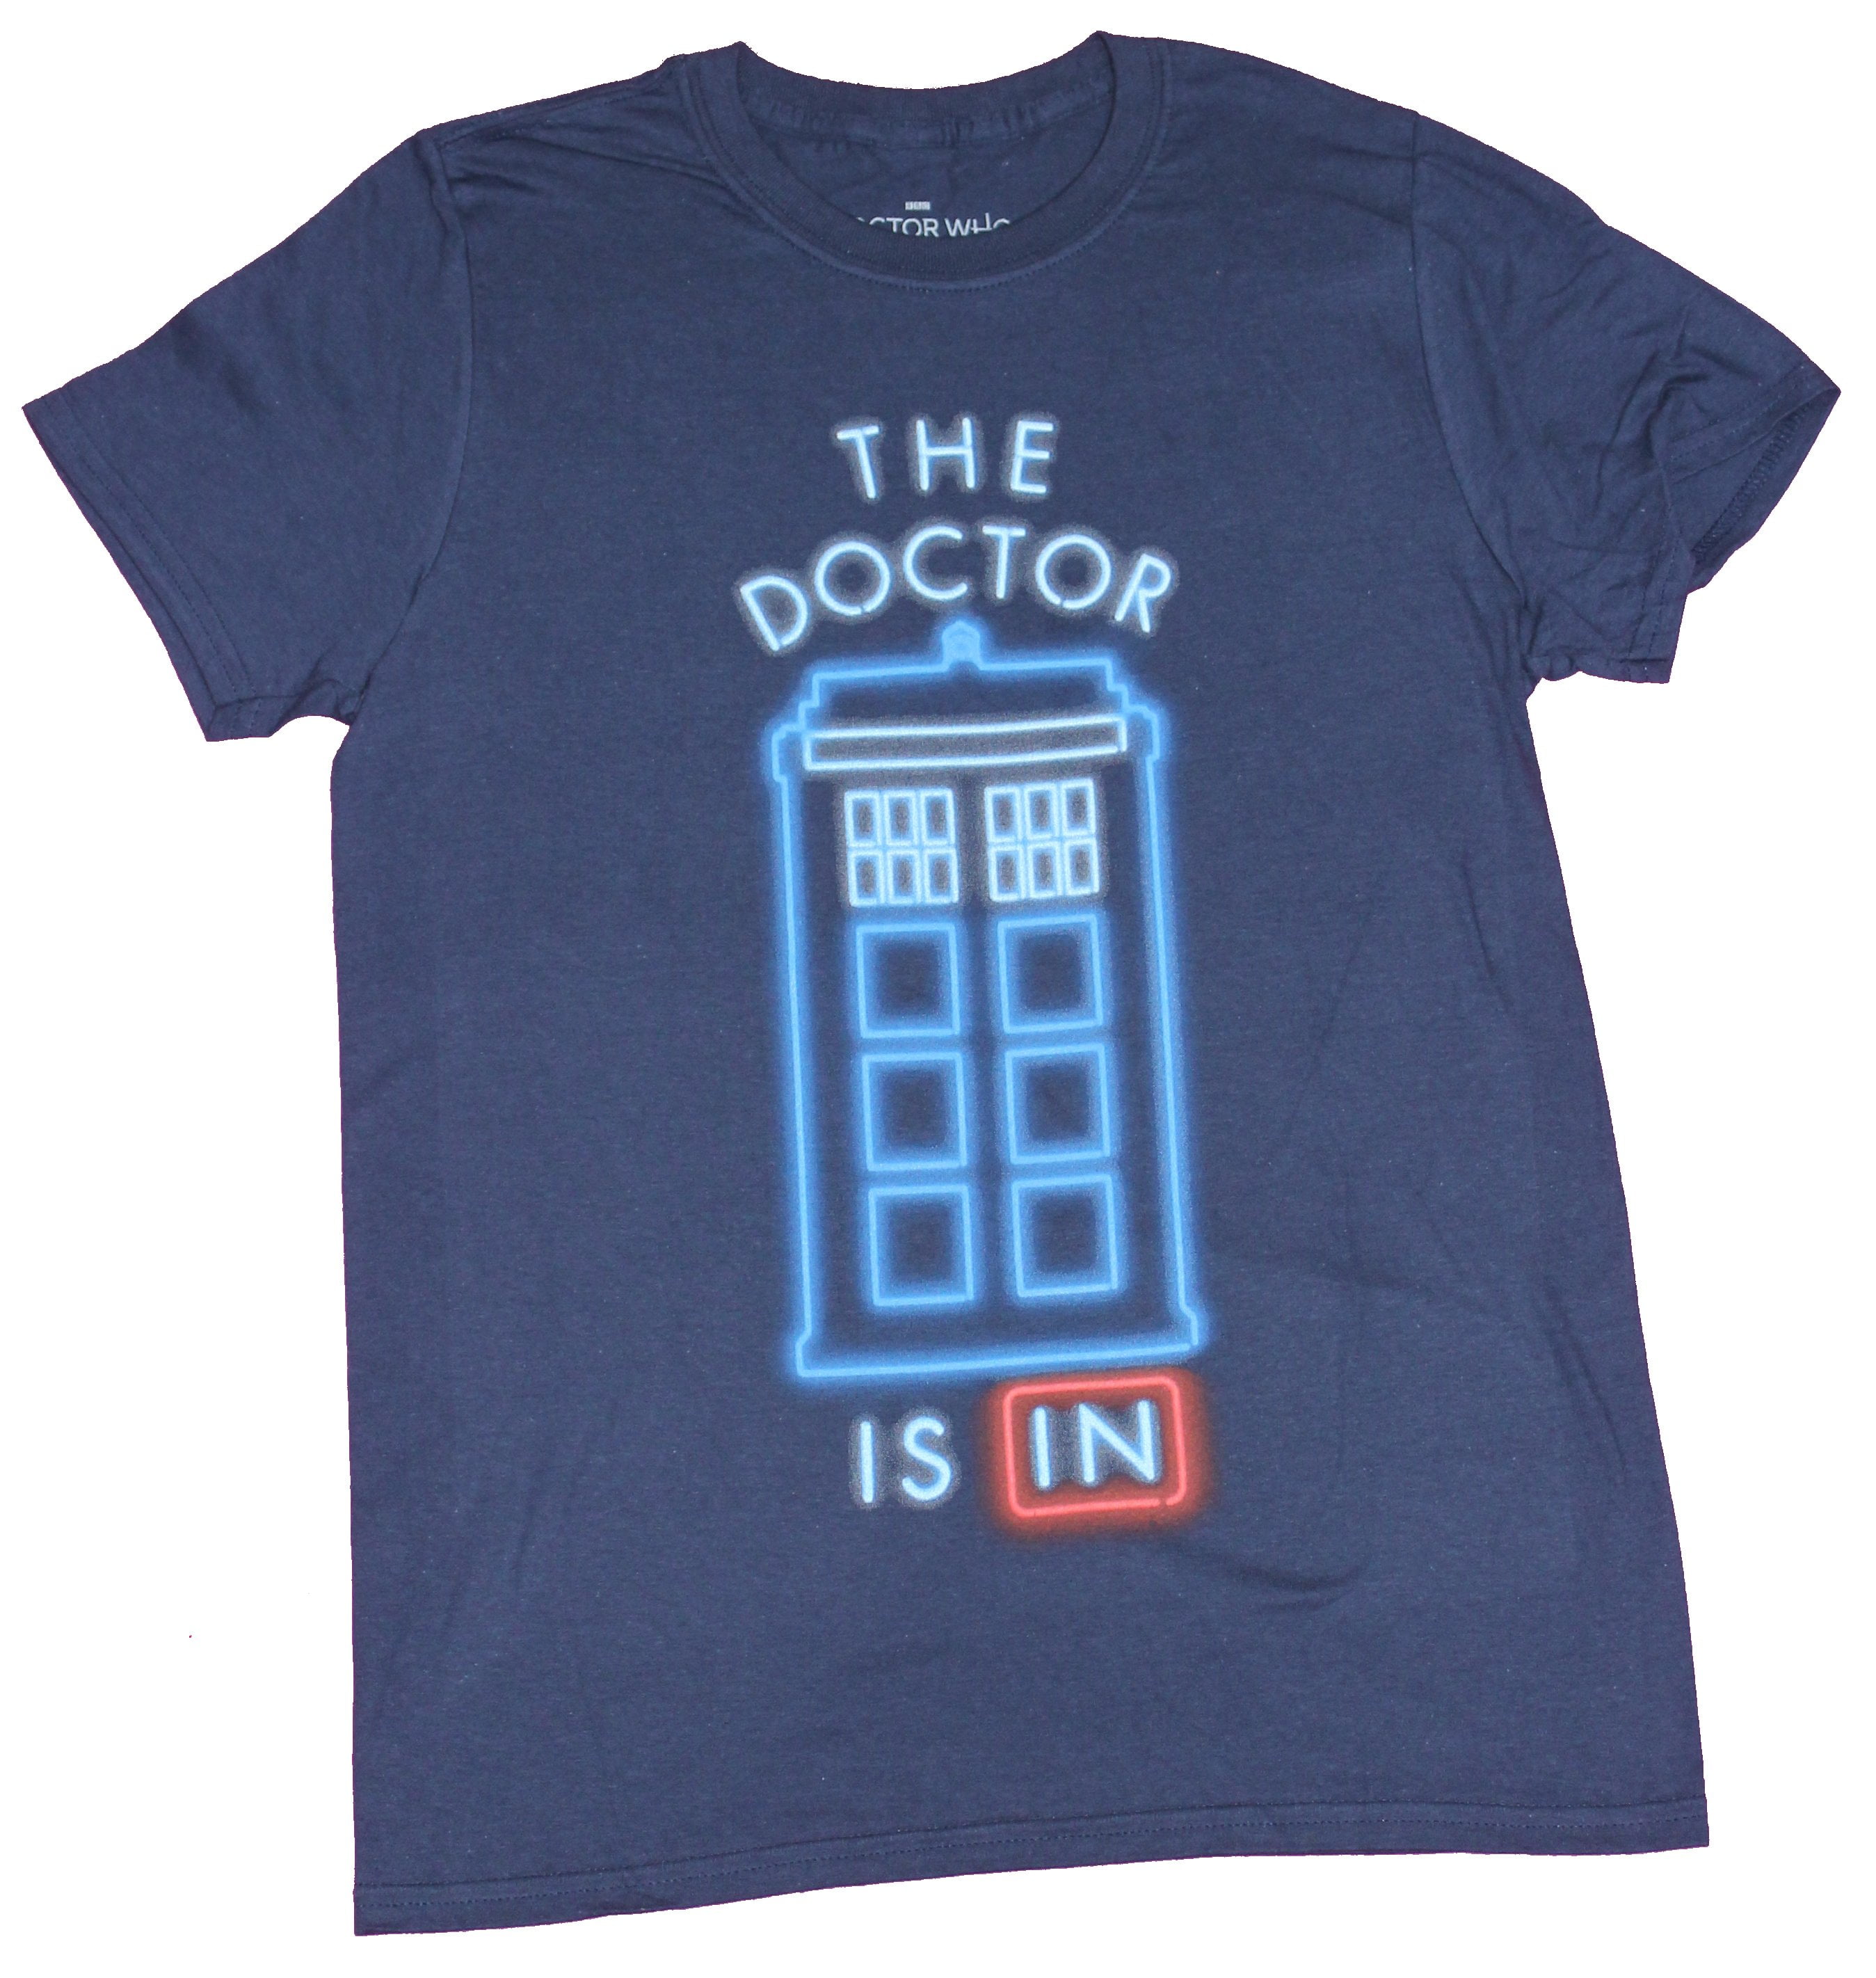 The Tardis and Phrase "Keep Calm and Don't Blink" T-Shirt 3XL NEW Doctor Who 